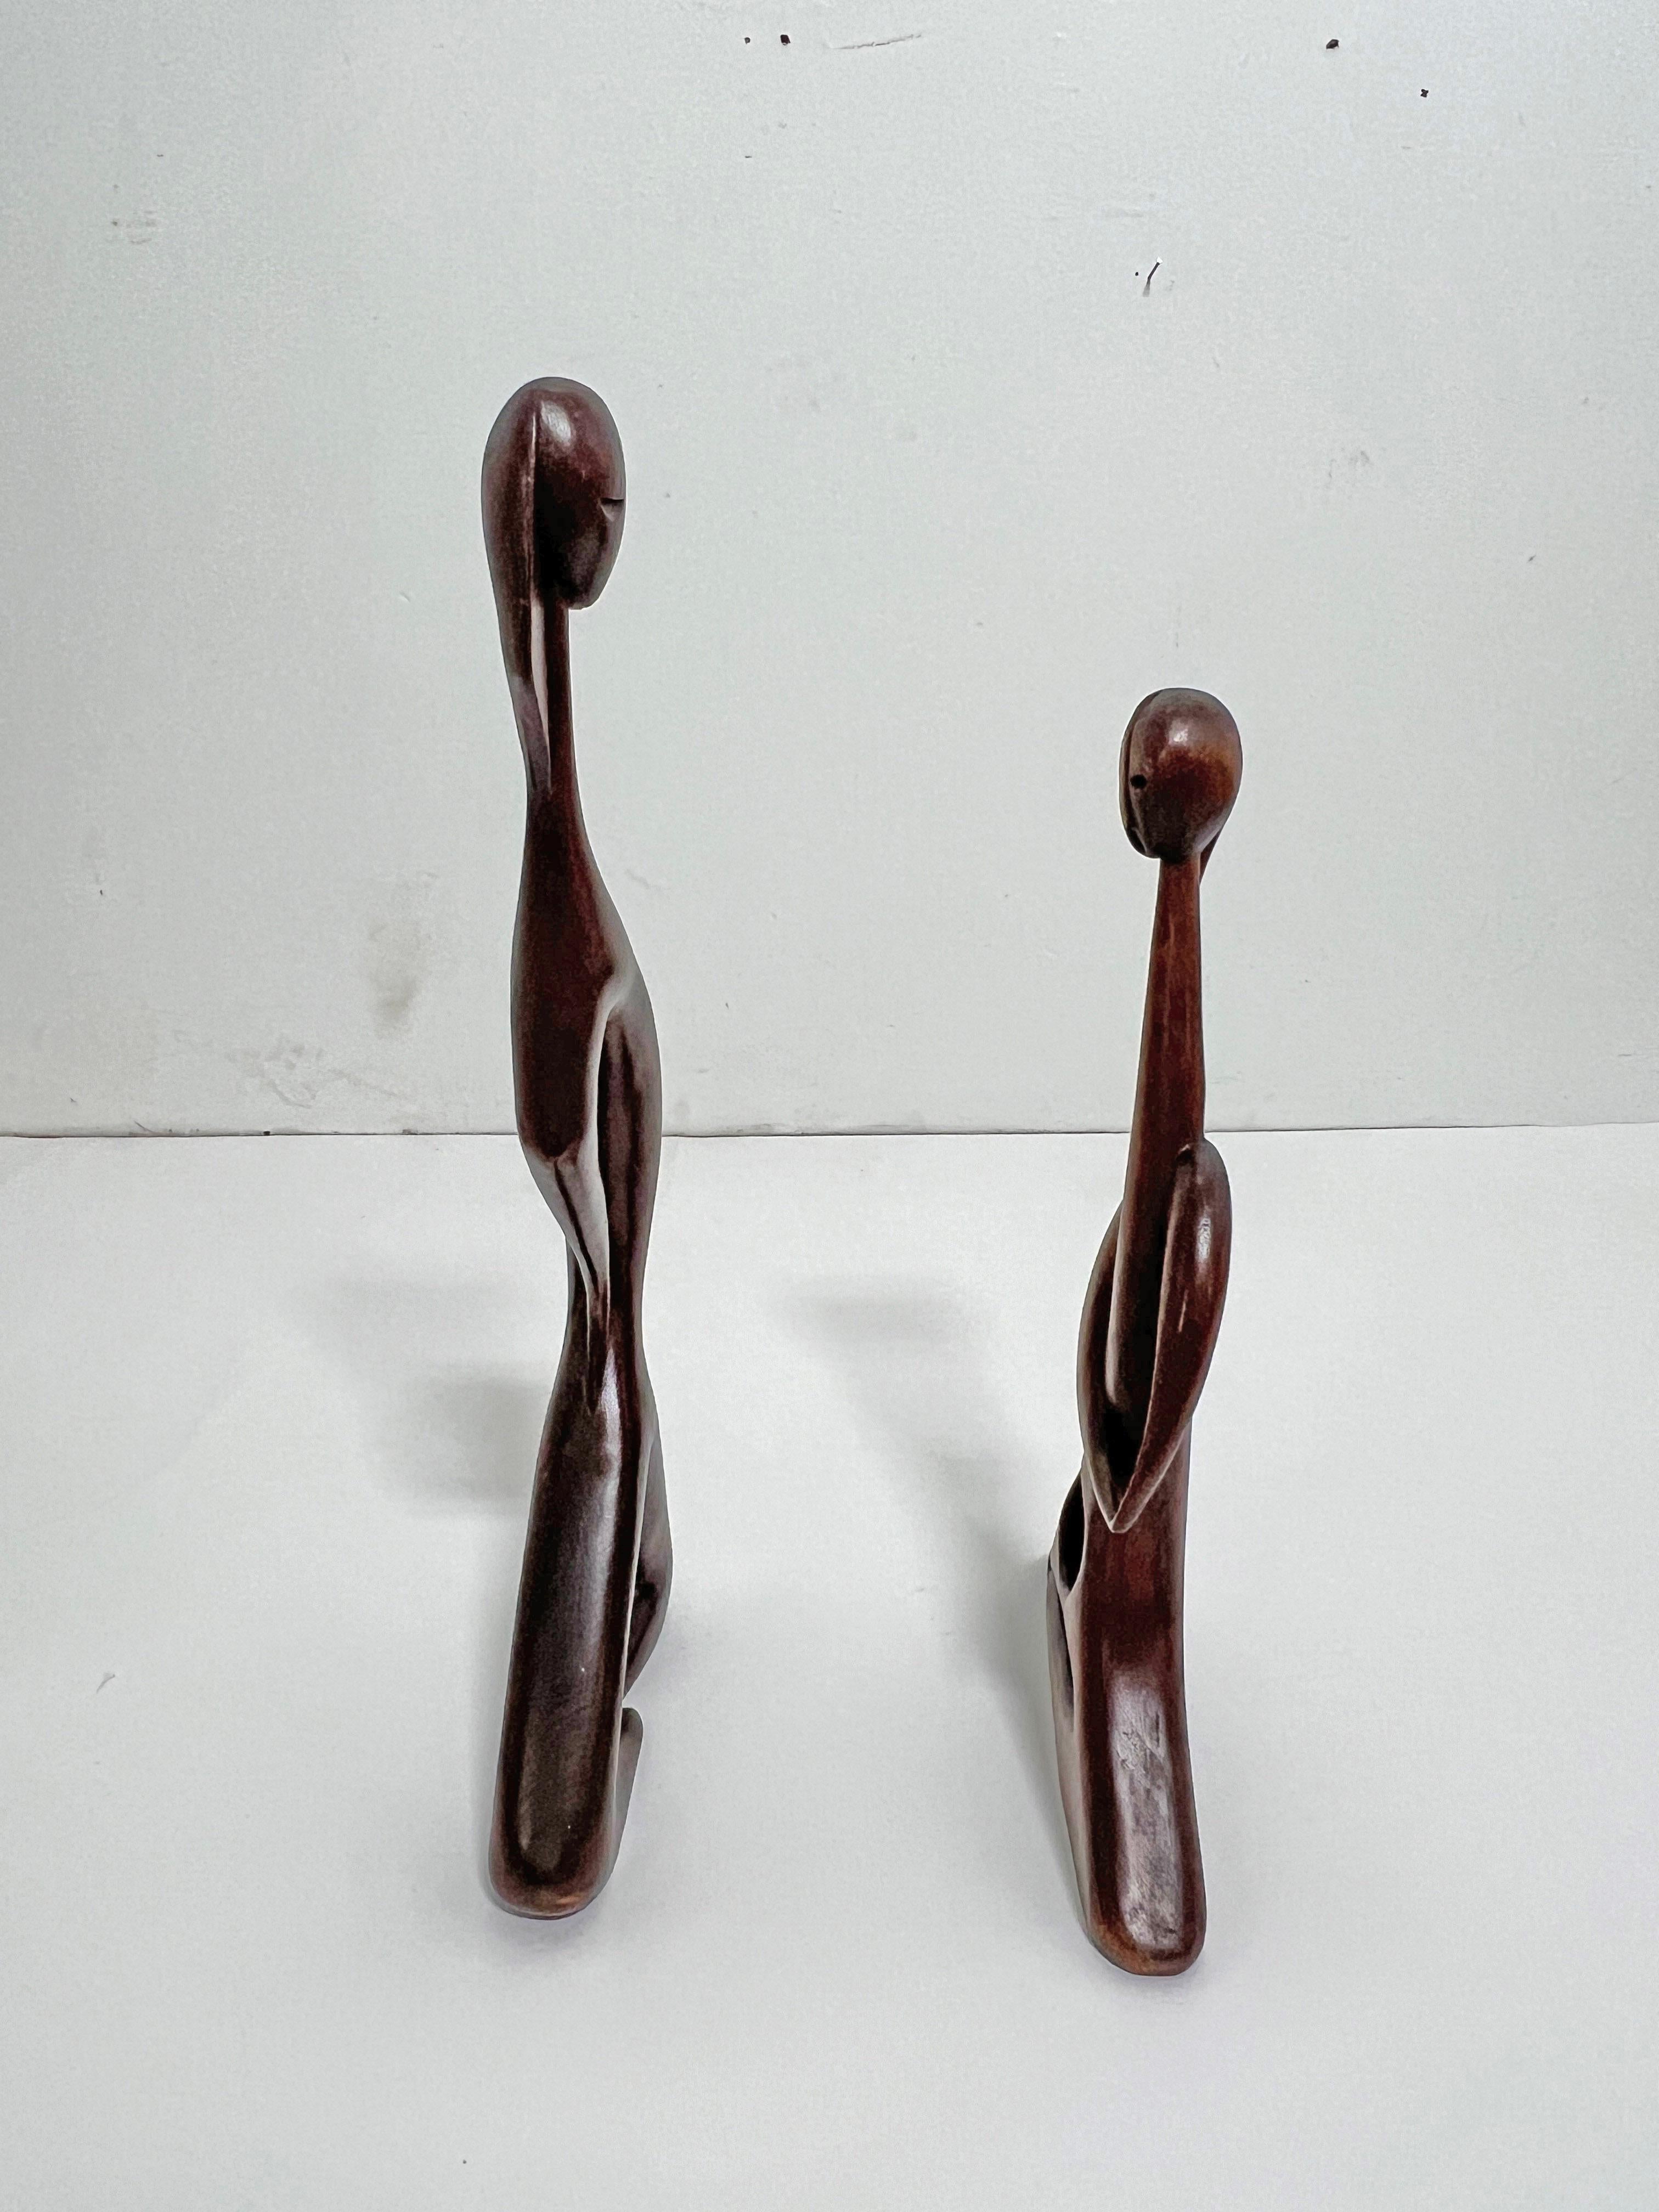 Mahogany Pair of Modernist Carved Abstract Figural Scuptures by Stella Popowski, C. 1950s For Sale